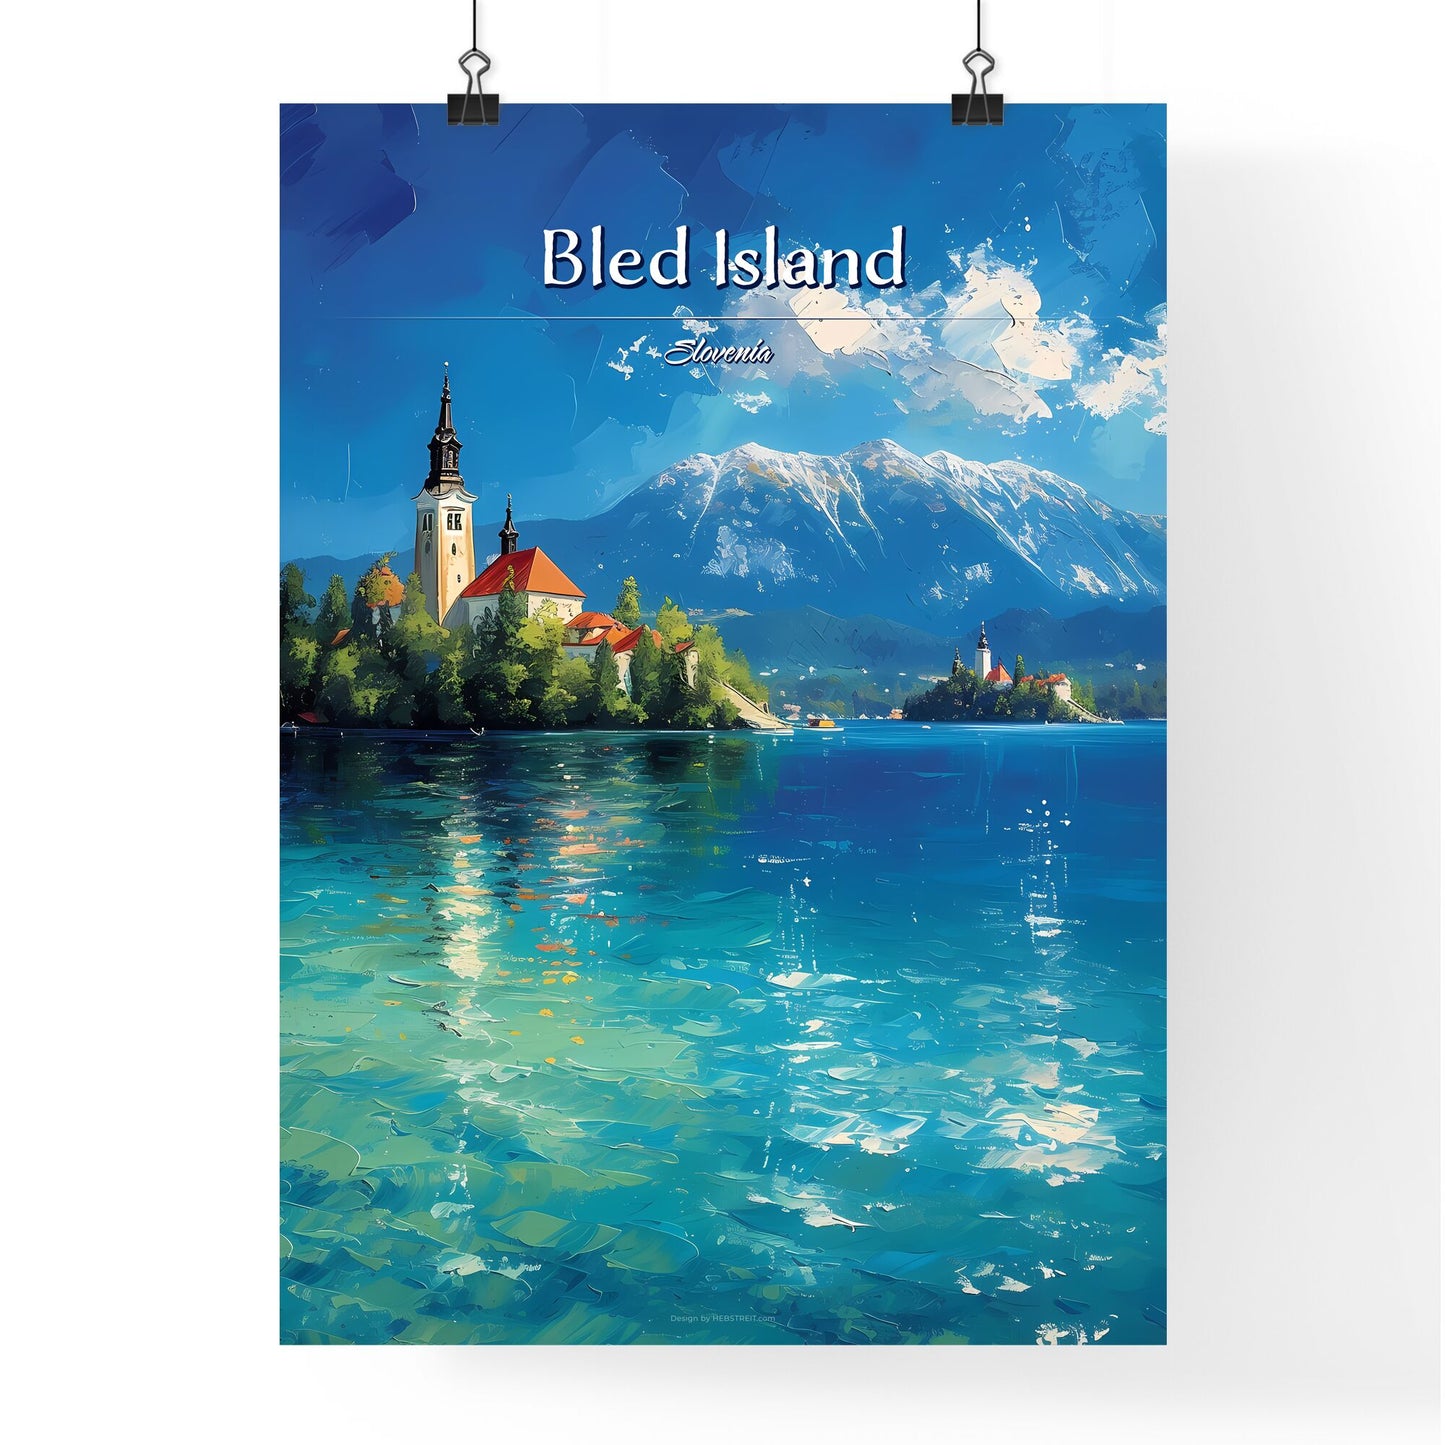 Bled Island, Slovenia - Art print of a building on an island in a body of water Default Title